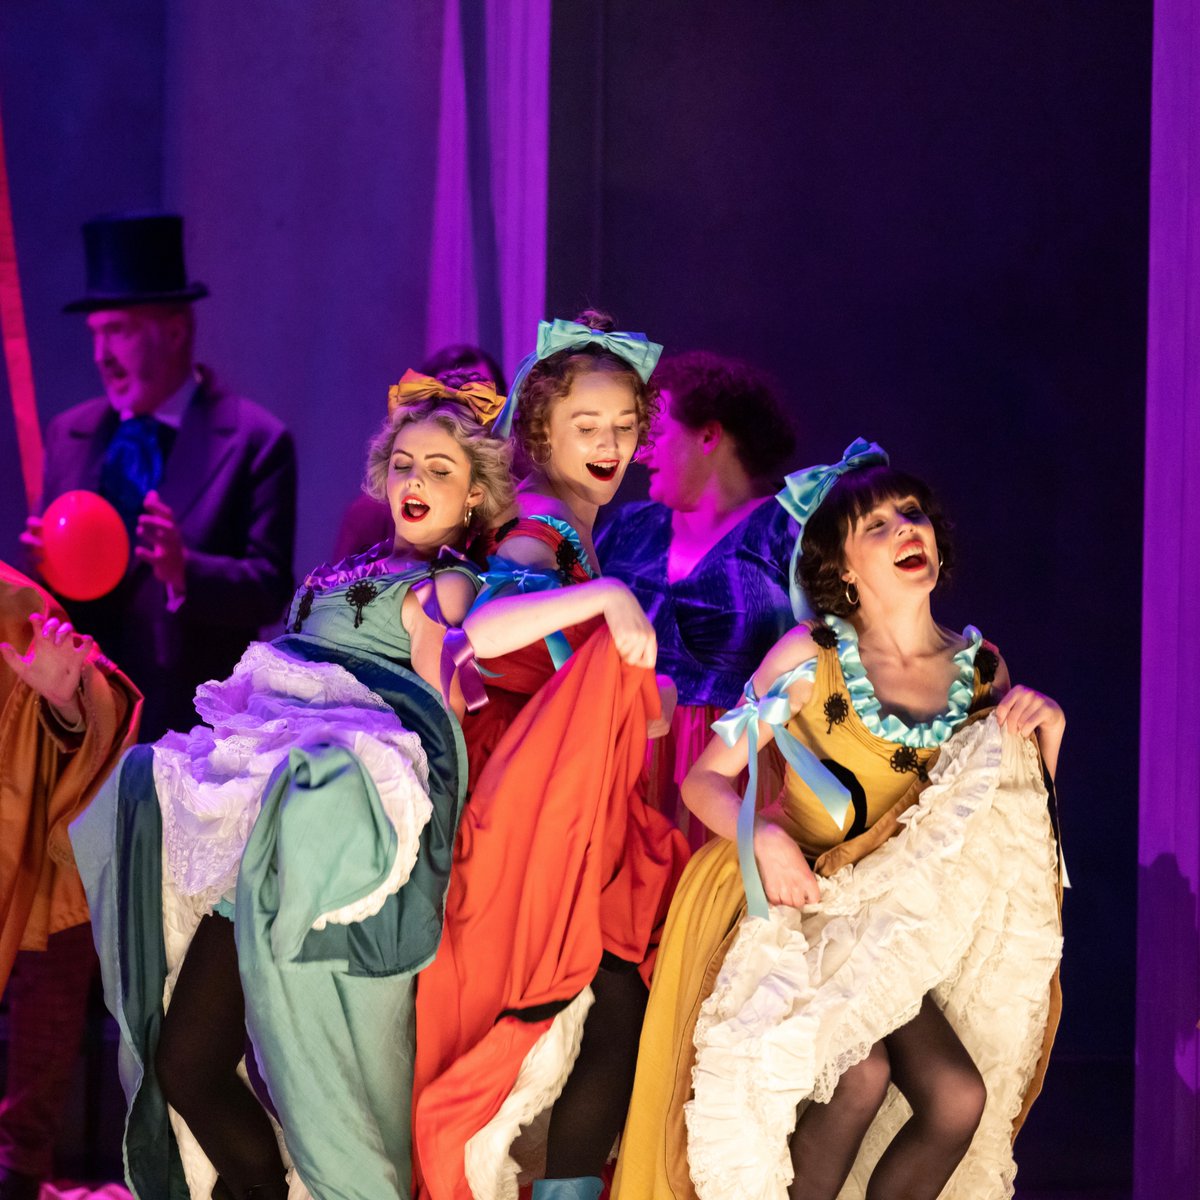 ★★★★ 'Passionately wild, unapologetically sumptuous” - The Arts Review After sold-out shows at @gaiety_theatre La traviata delights audiences and critics alike. Catch our final two performances at @CorkOperaHouse this Wed & Fri! Full blog post: bit.ly/3wFtBbC